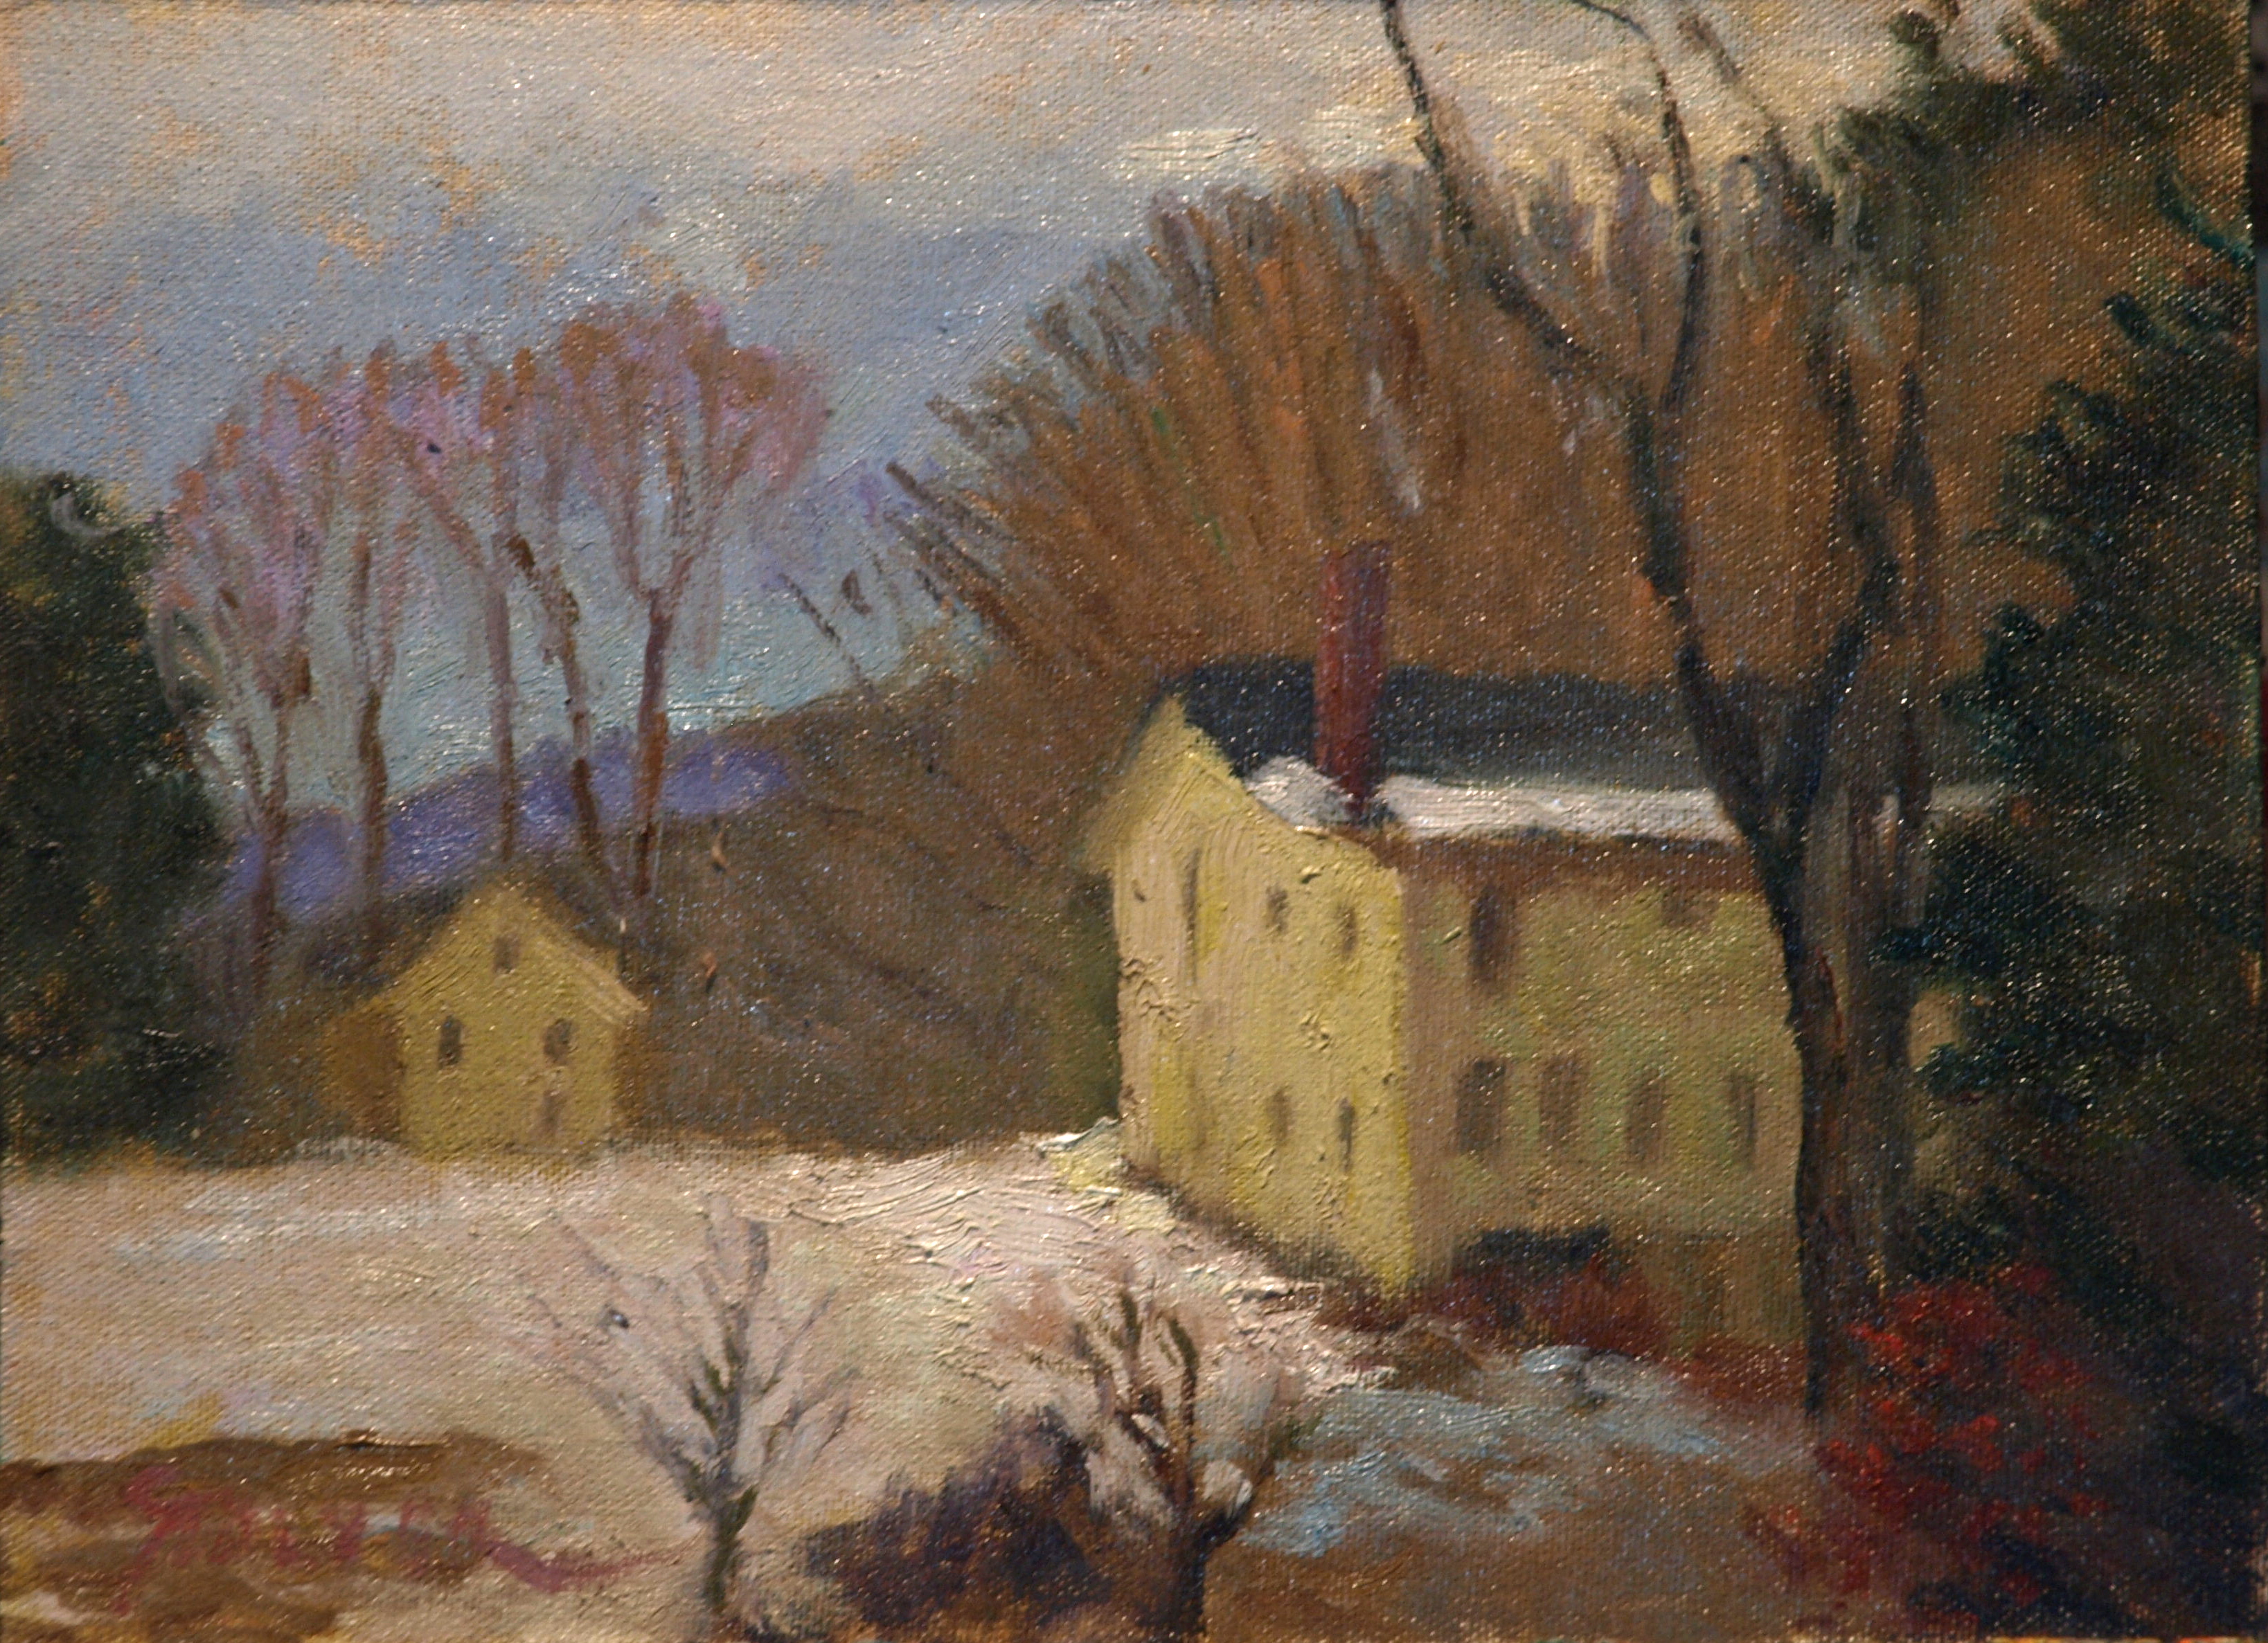 Yellow Buildings in Snow, Oil on Canvas on Panel, 9 x 12 Inches, by Richard Stalter, $225